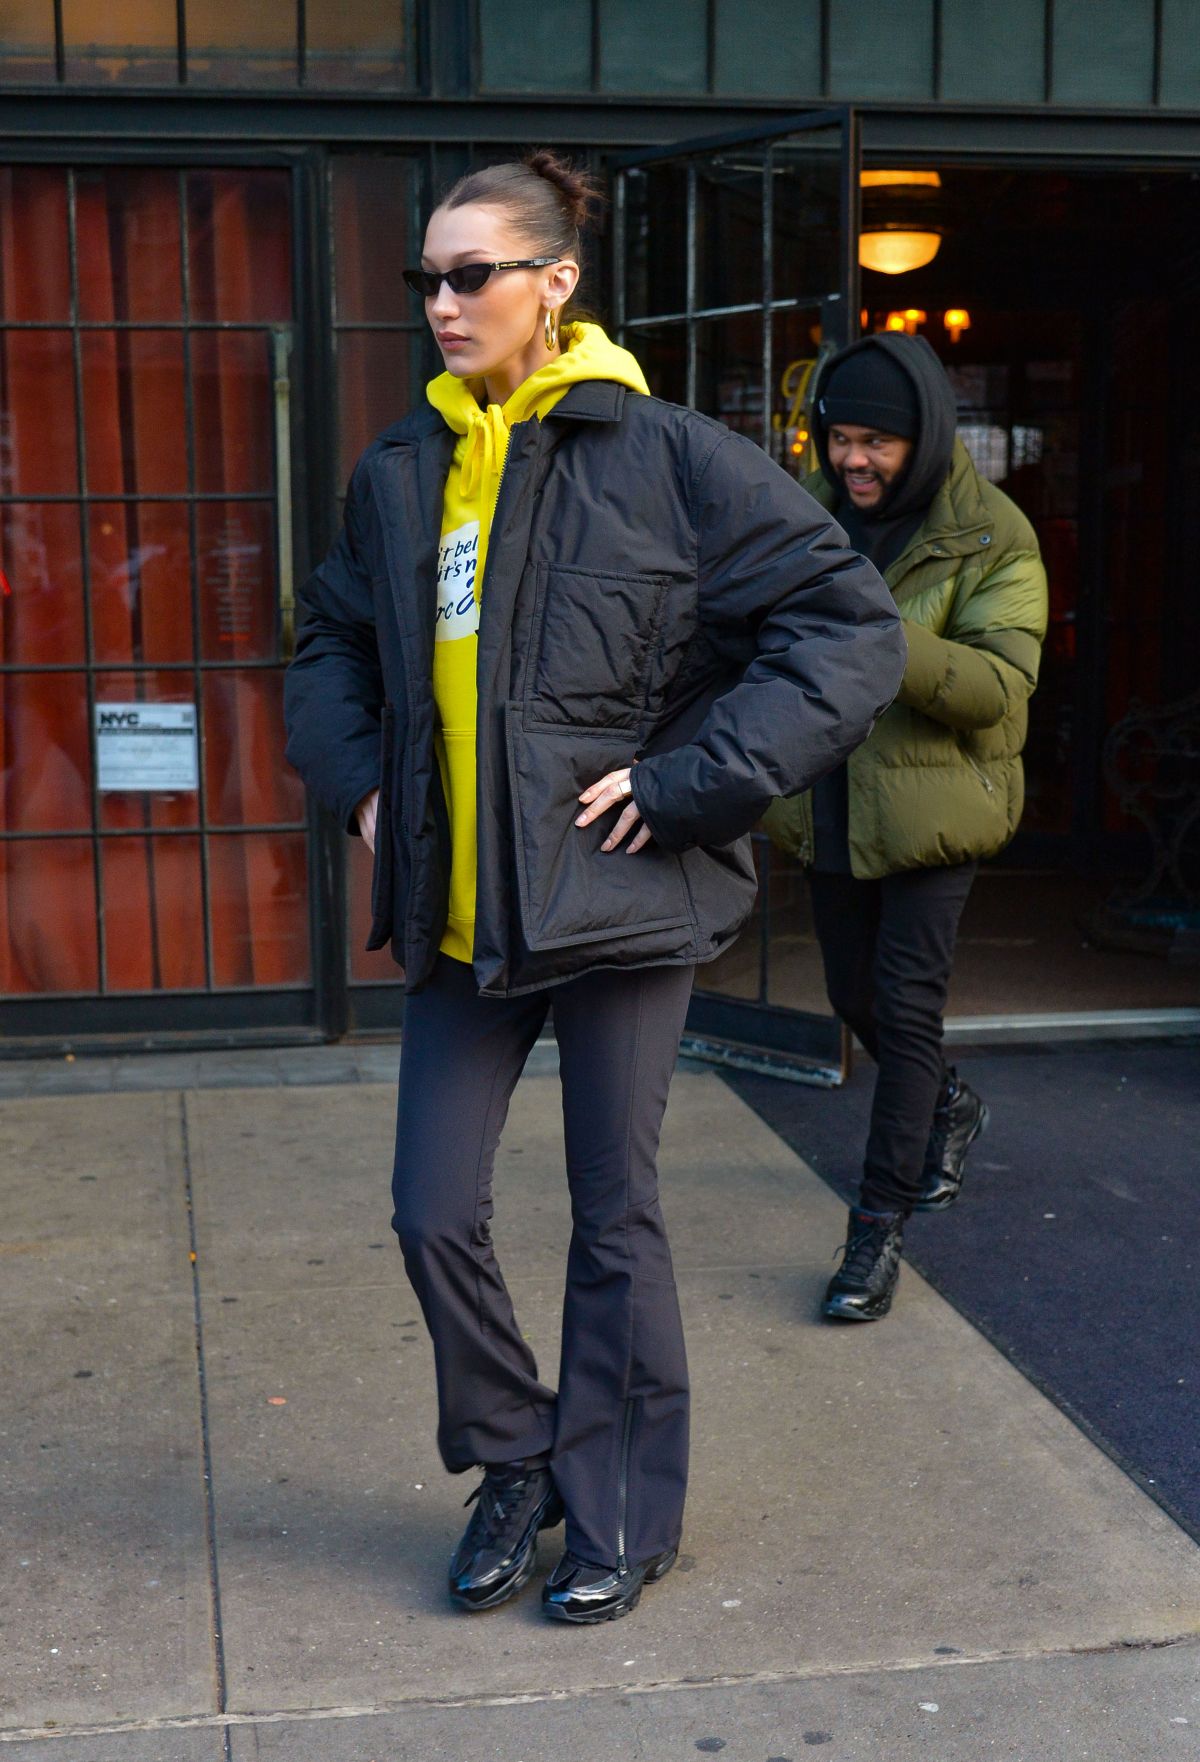 BELLA HADID and The Weeknd Out in New York 01/26/2019 – HawtCelebs